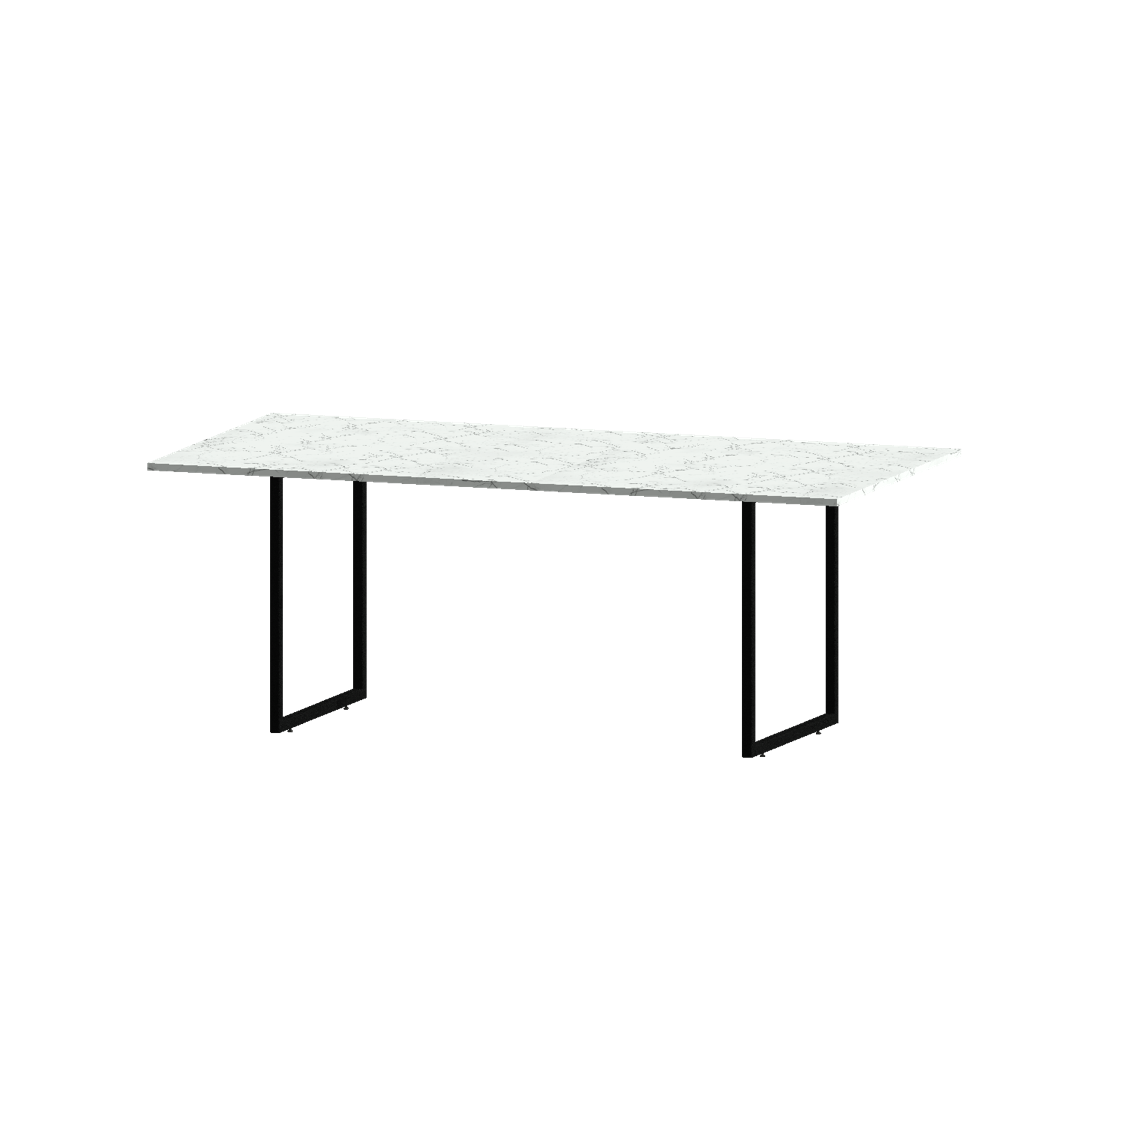 DINING TABLE, RECTANGLE, LARGE - Customer's Product with price 4700.00